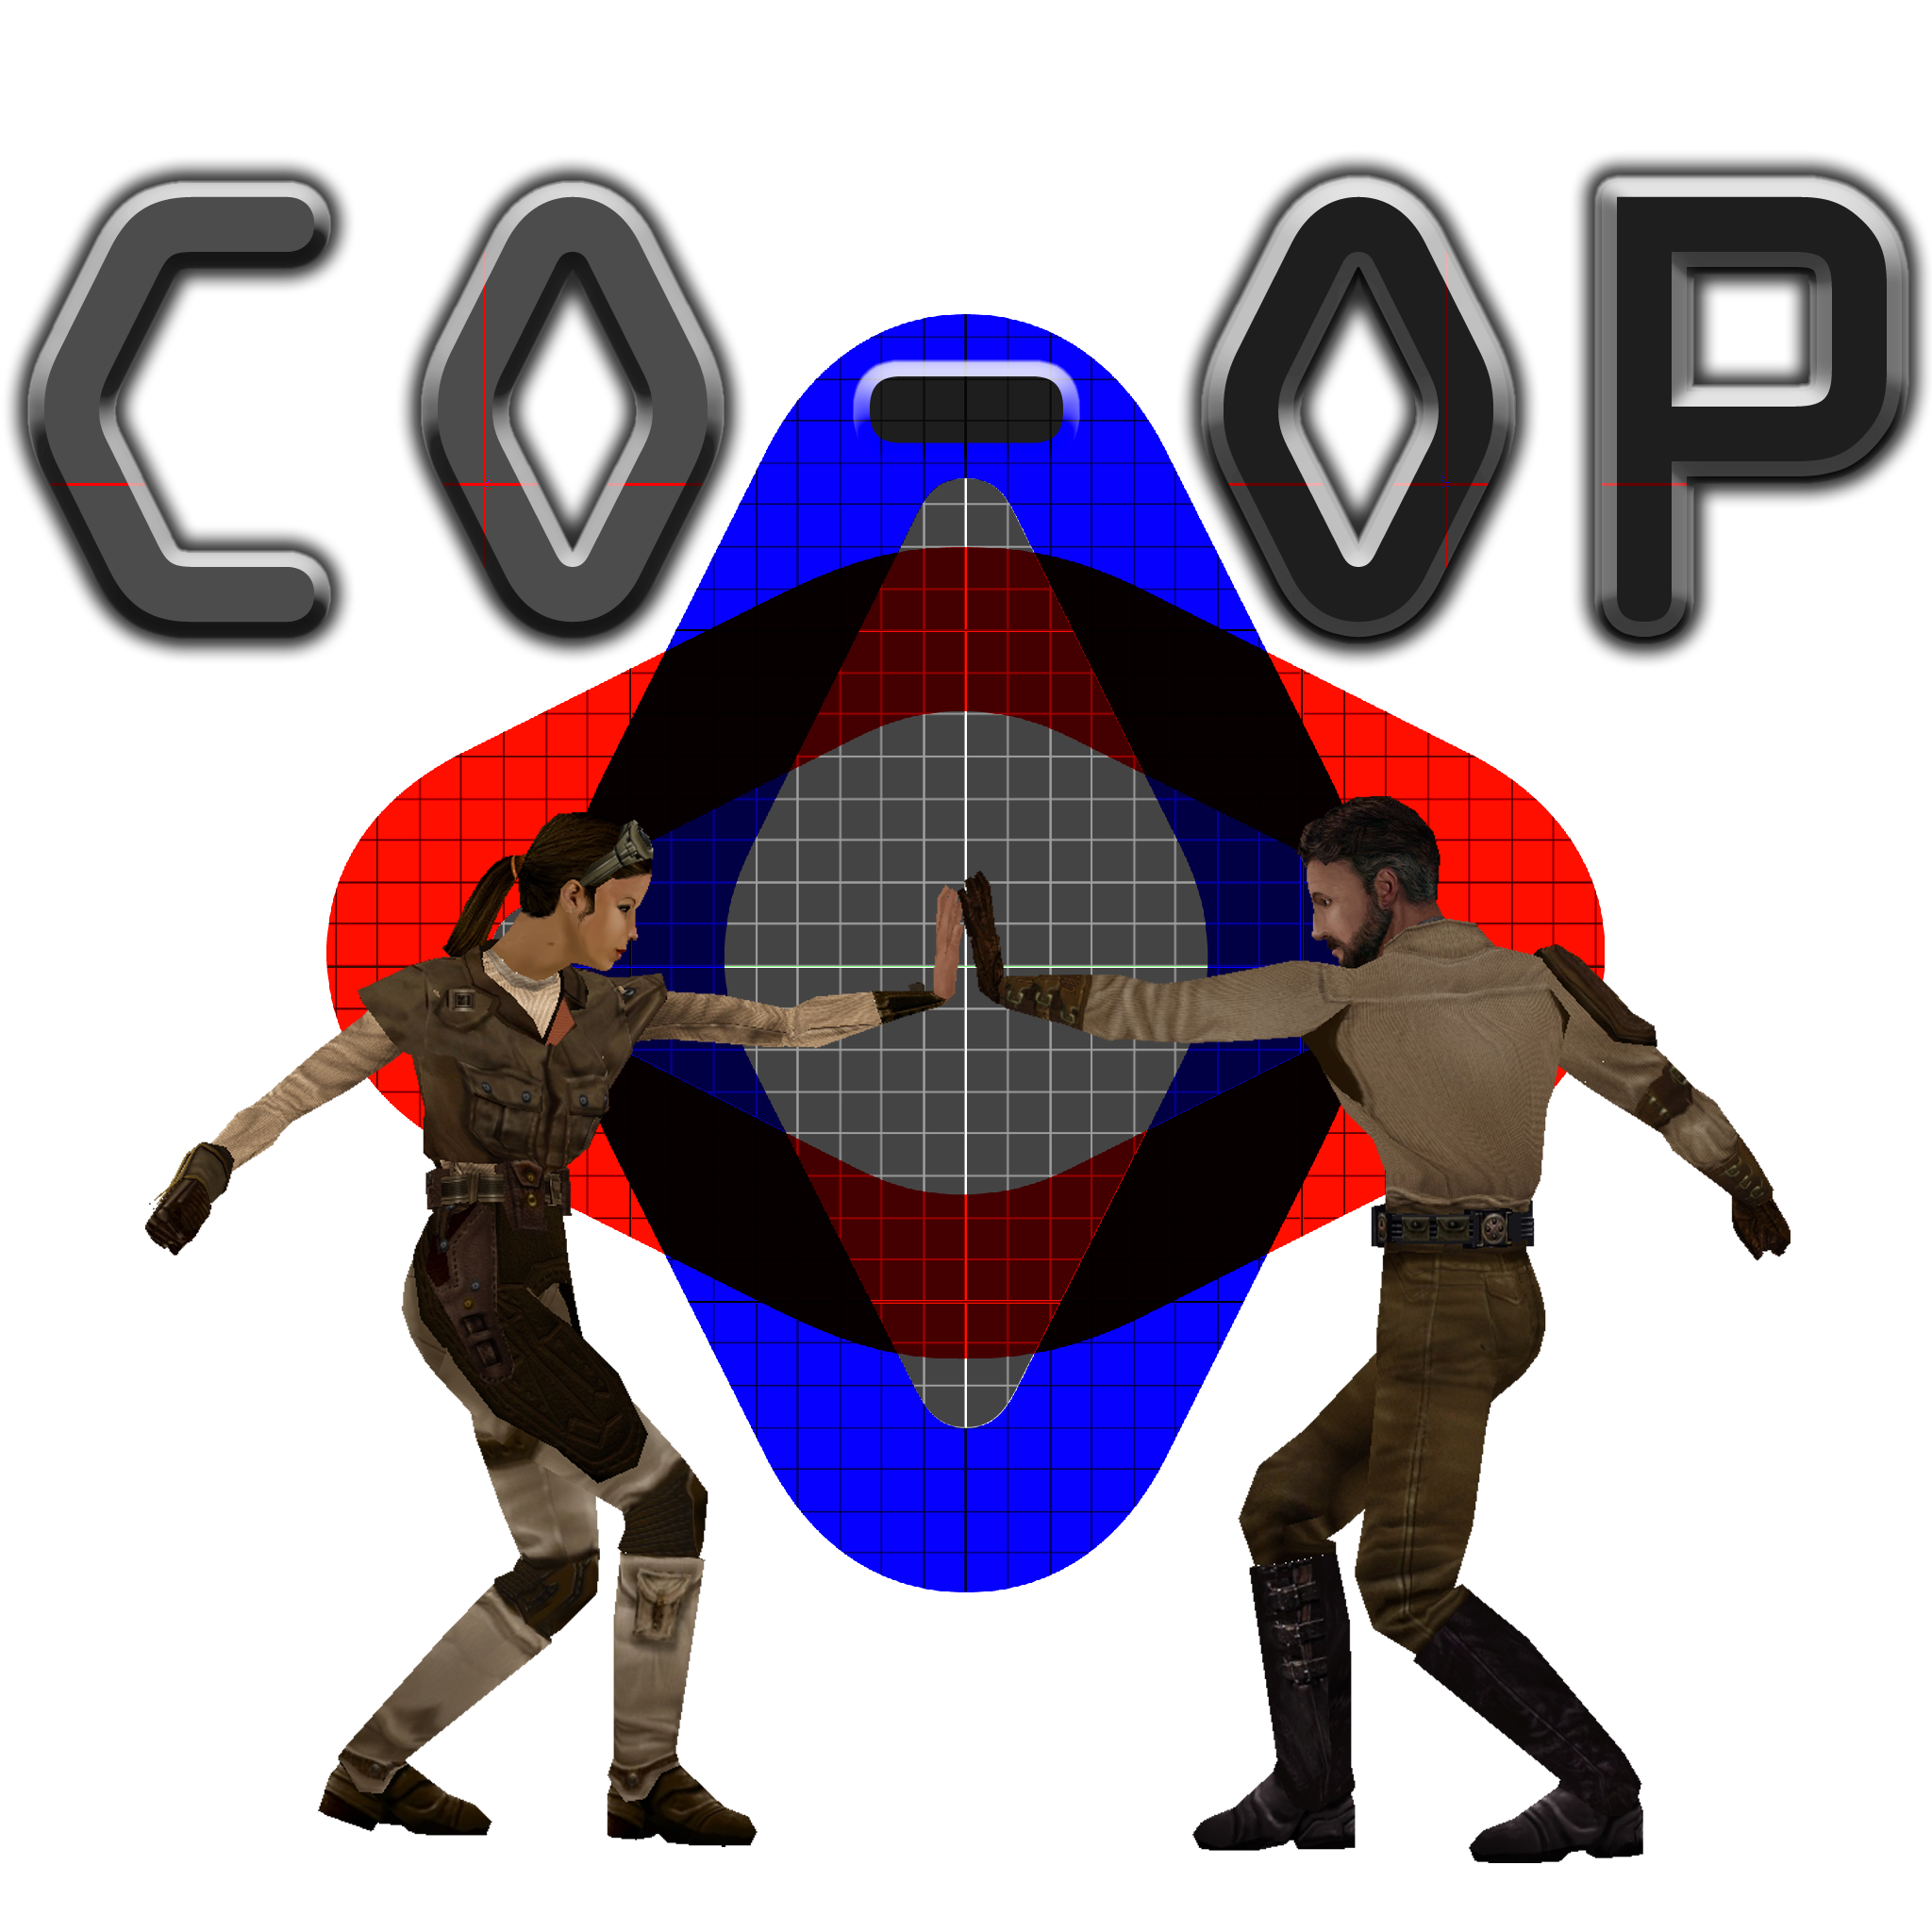 More information about "Coop Corps 1.0 | W/ JAPRO Support"